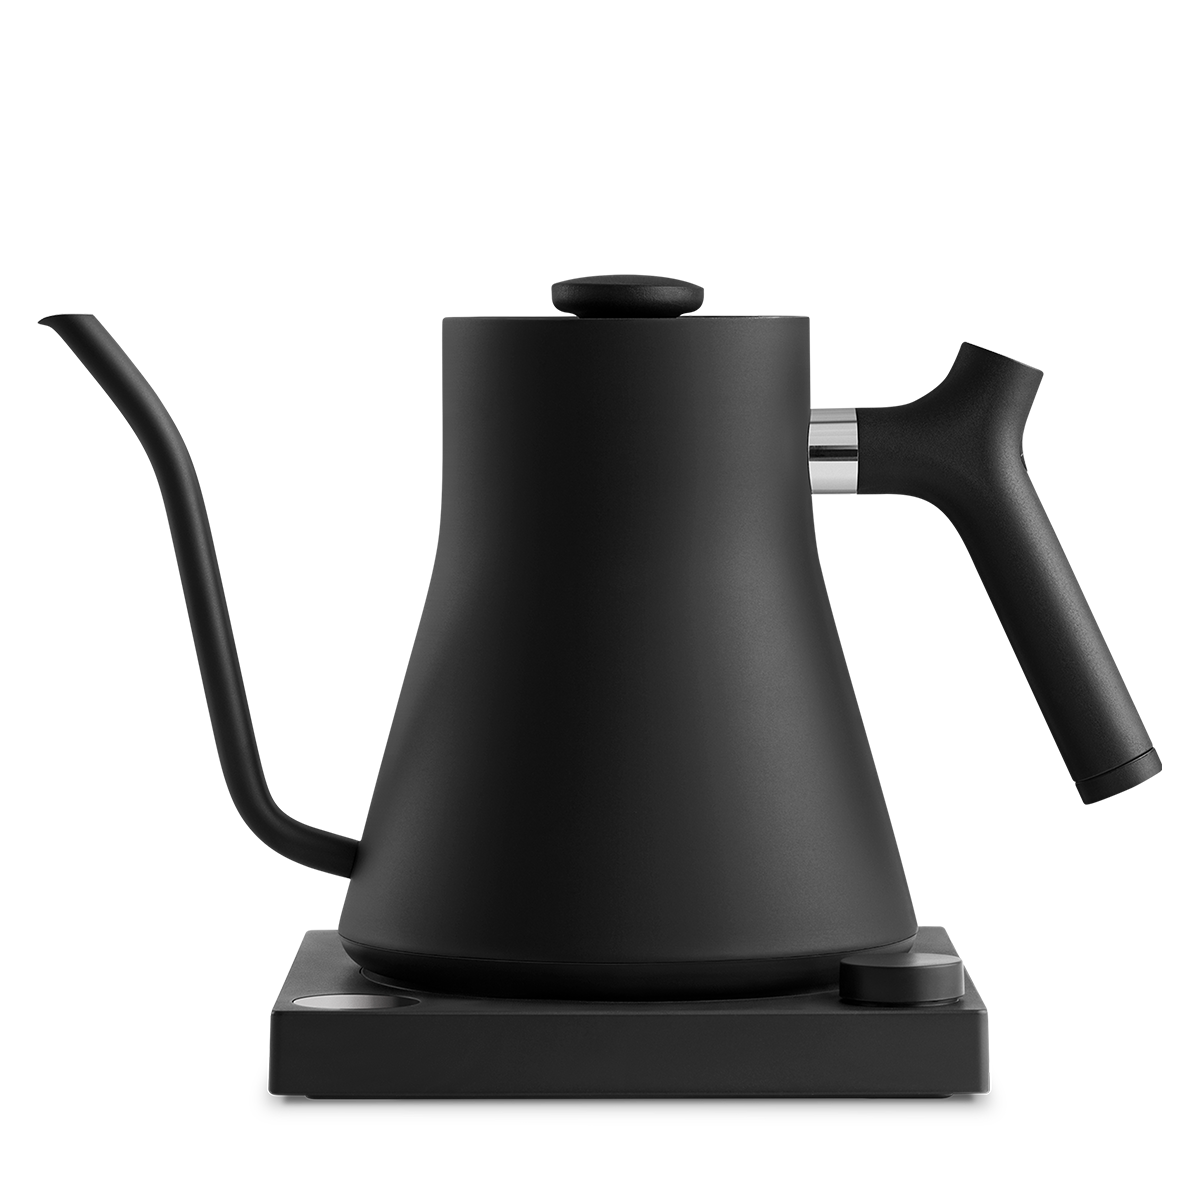 FELLOW - ELECTRIC POUR OVER KETTLE - BLACK